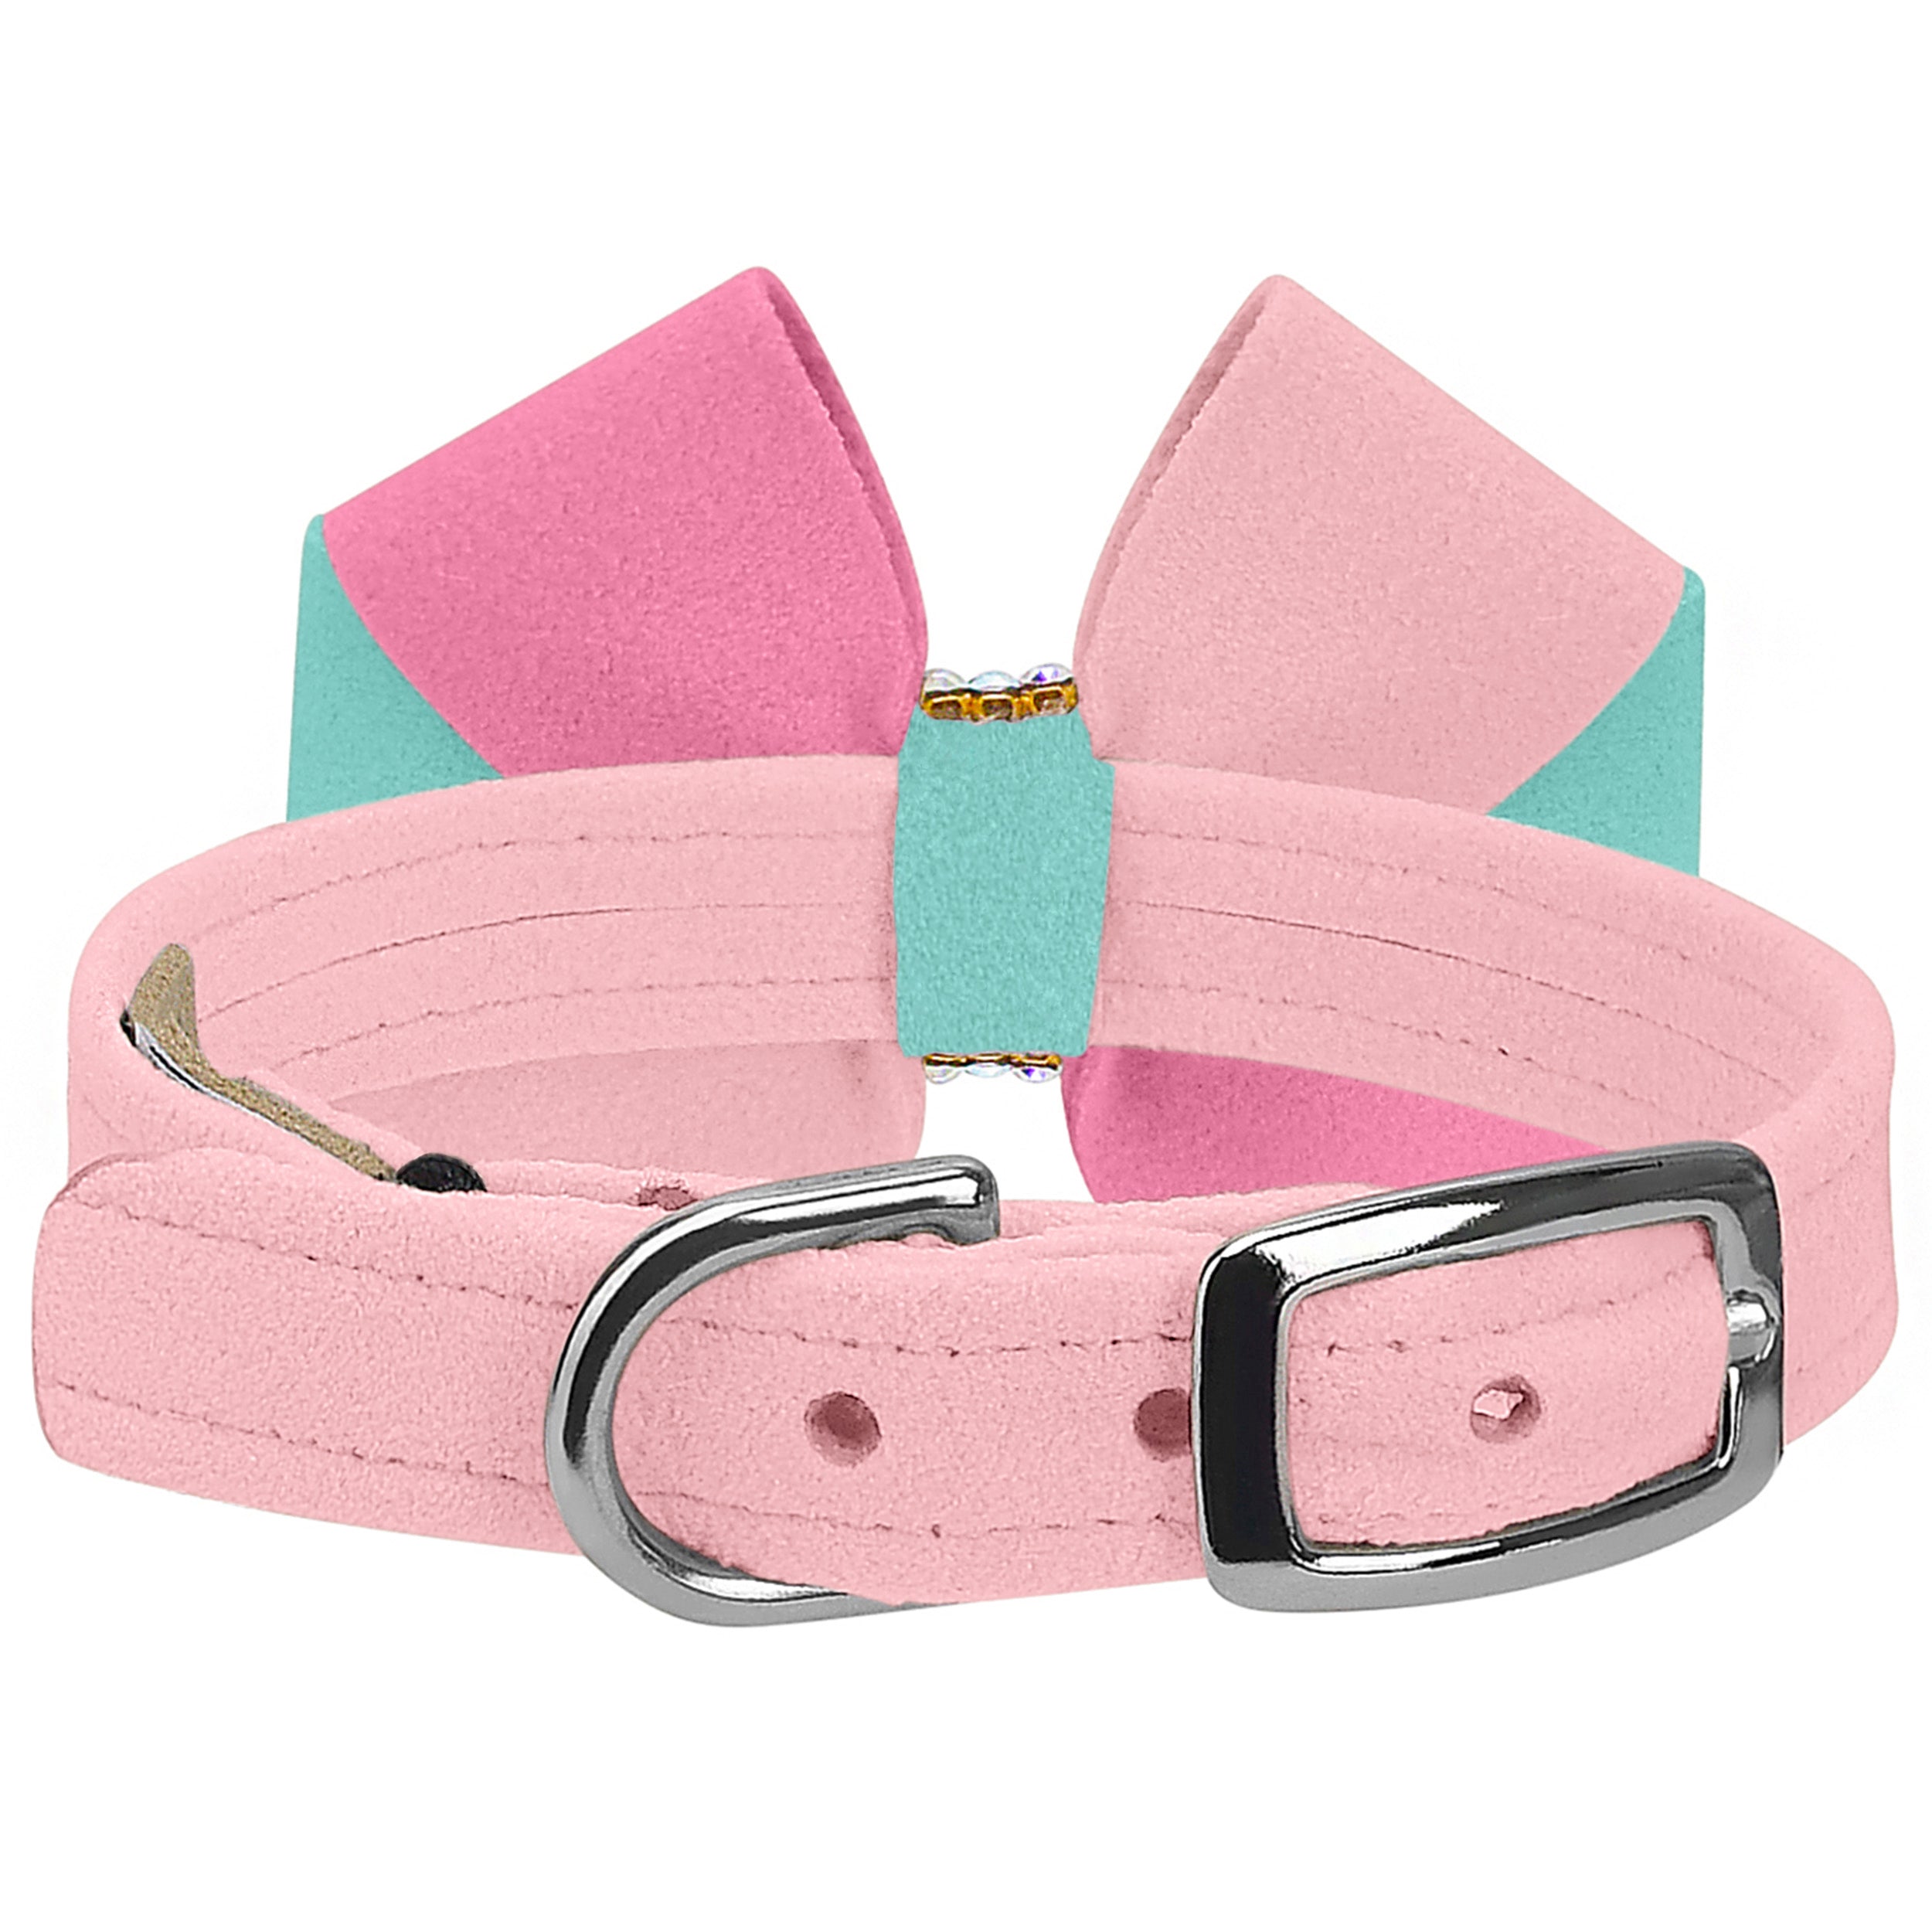 Cotton Candy Pink 1/2 Cat Collars